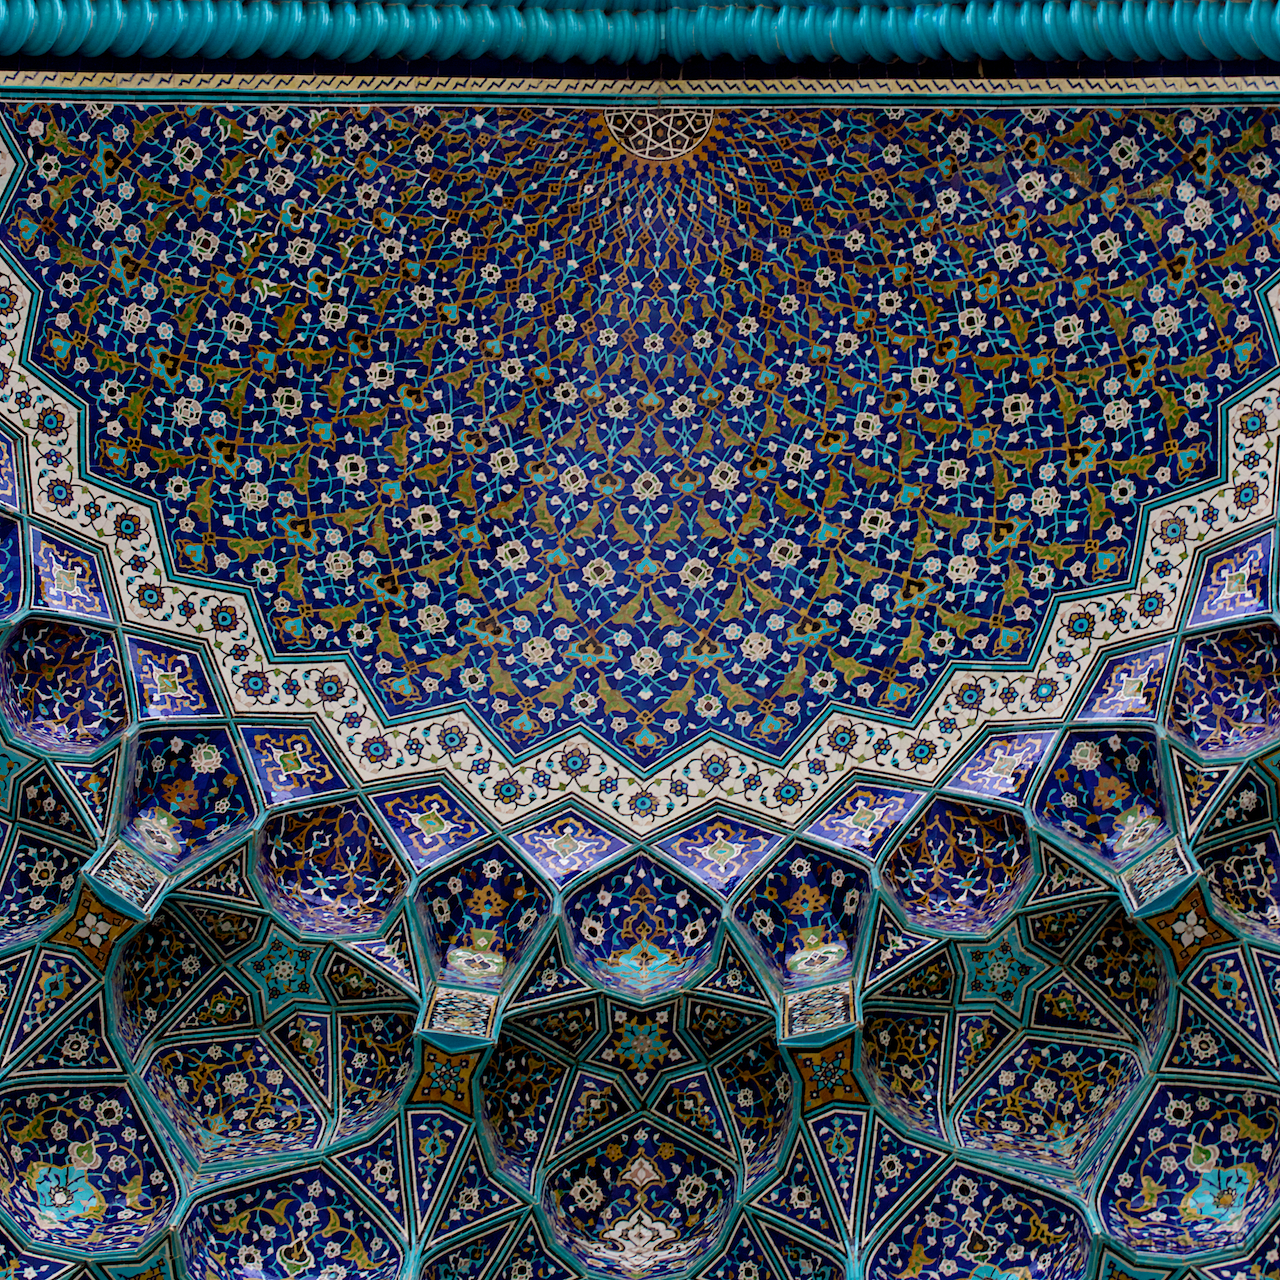 Patterns in Shah mosque | Shayan Lens